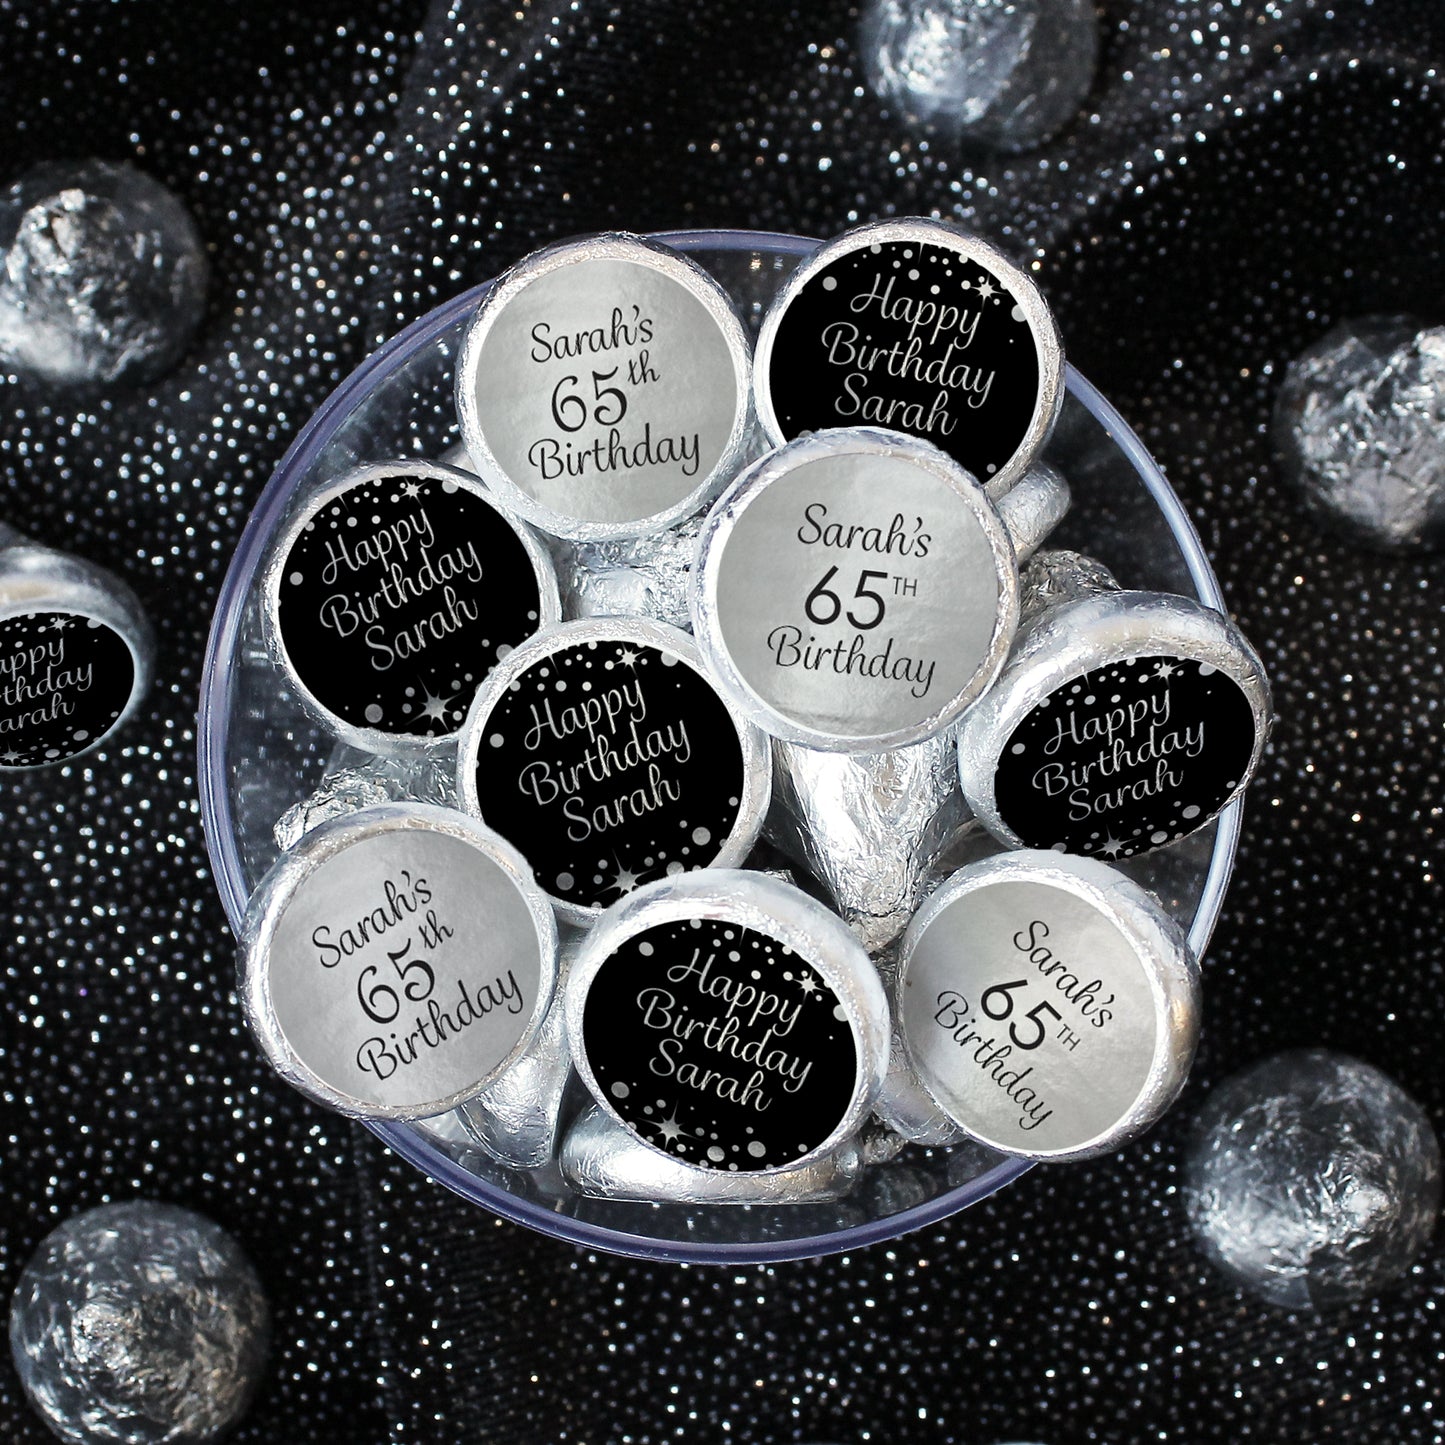 Personalized Black and Silver Birthday Party Favor Stickers - Shiny Foil - 180 ct